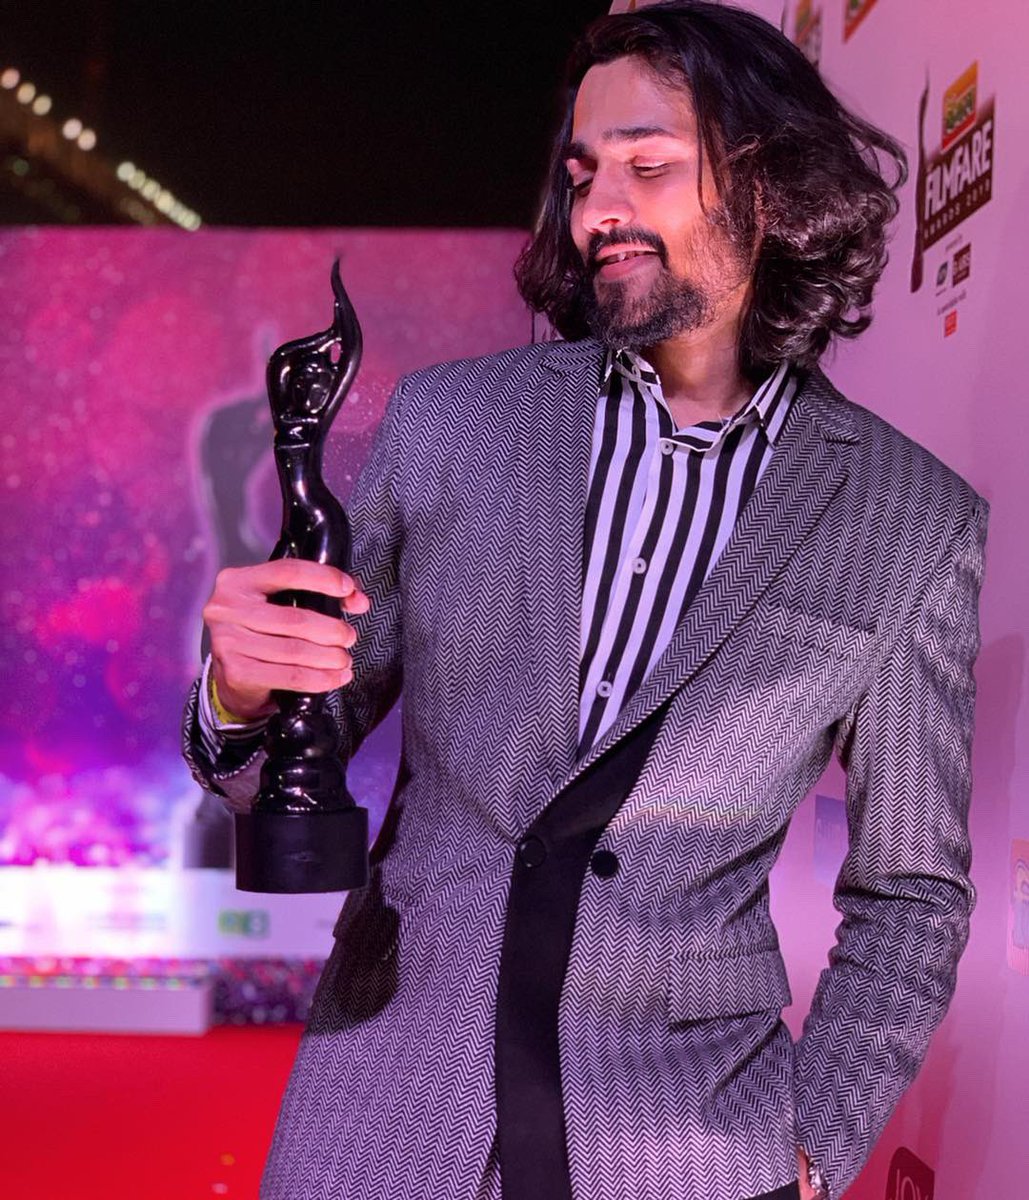 My first Filmfare Award.
Thank you BB Ki Vines and Thanks to everyone who voted for ‘Plus Minus’. This is OUR filmfare!♥️🖤 
#FilmfareAwards2019 #BestShortFilm #PopularChoice #PlusMinus